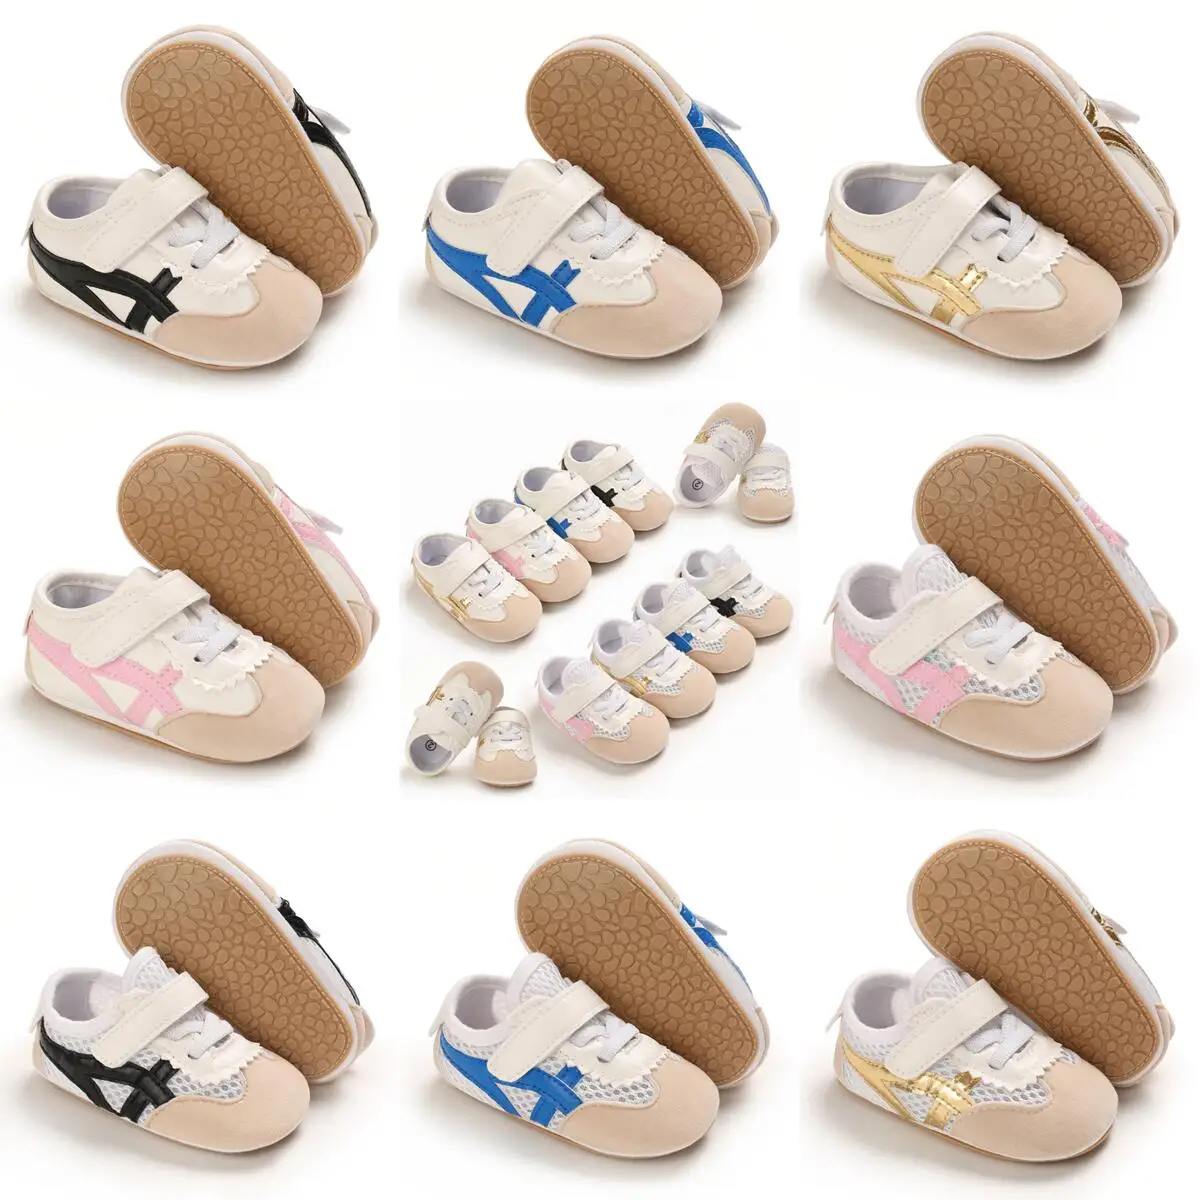 

Newborn Boys Shoes Pre-Walker Soft Sole Children's Shoes Baby Shoes Spring Summer Mesh Sneakers Bebes Sneakers Casual Shoes